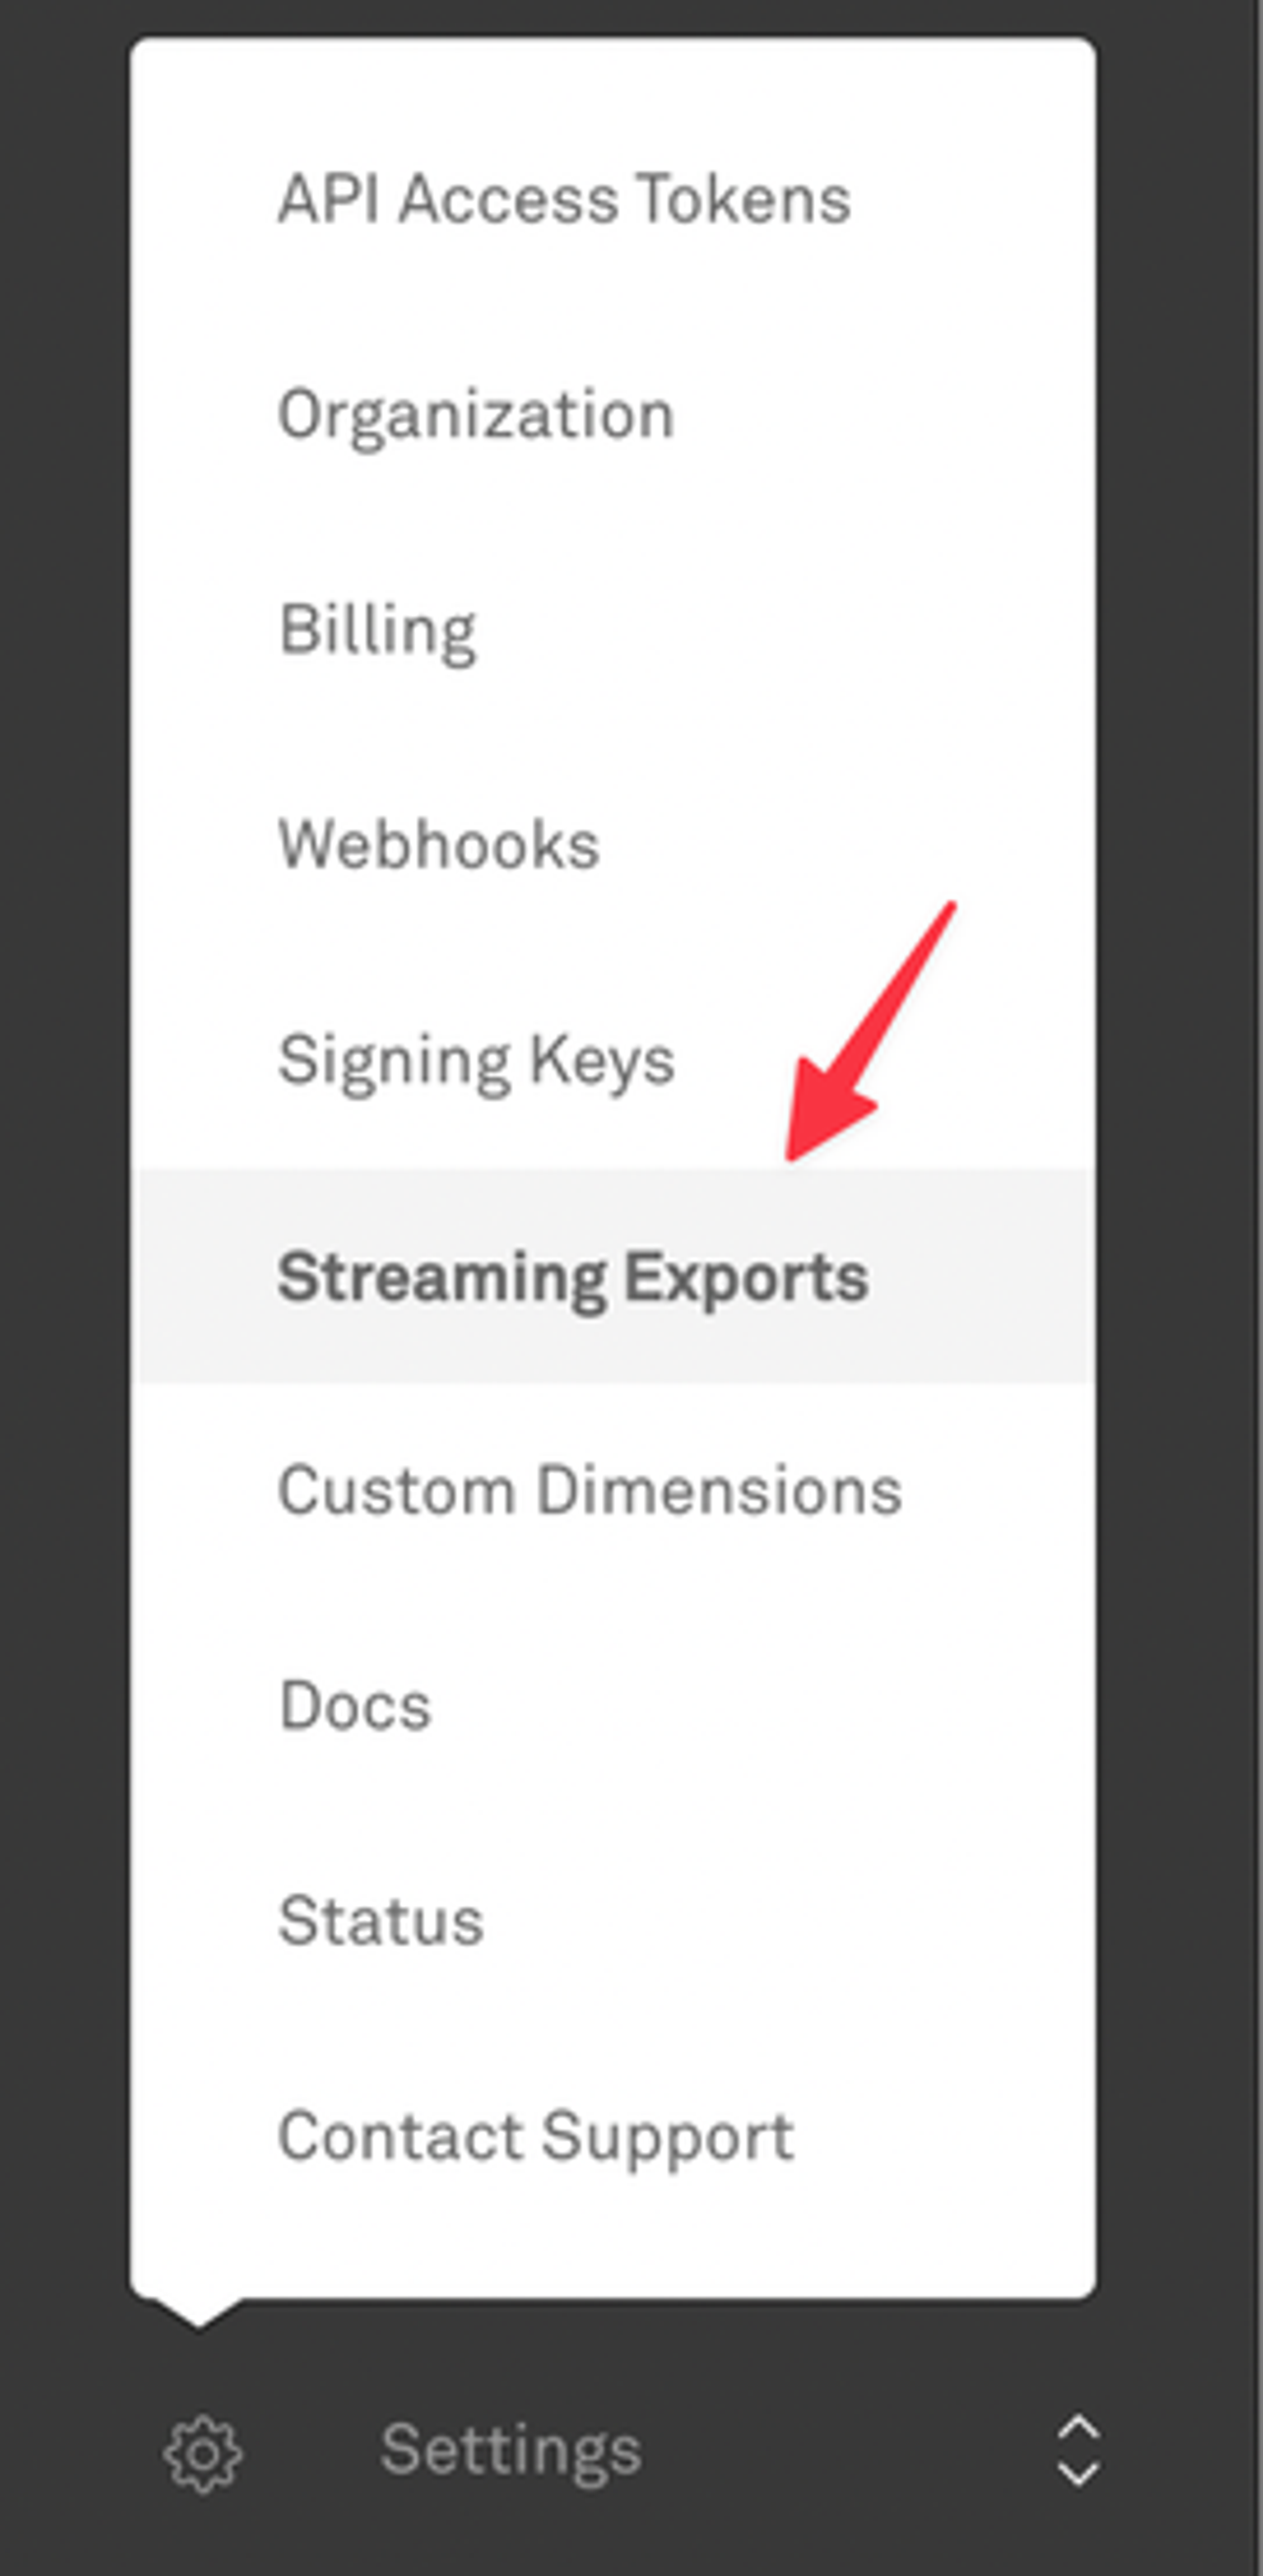 Left-side navigation menu with "Streaming Exports" in focus.